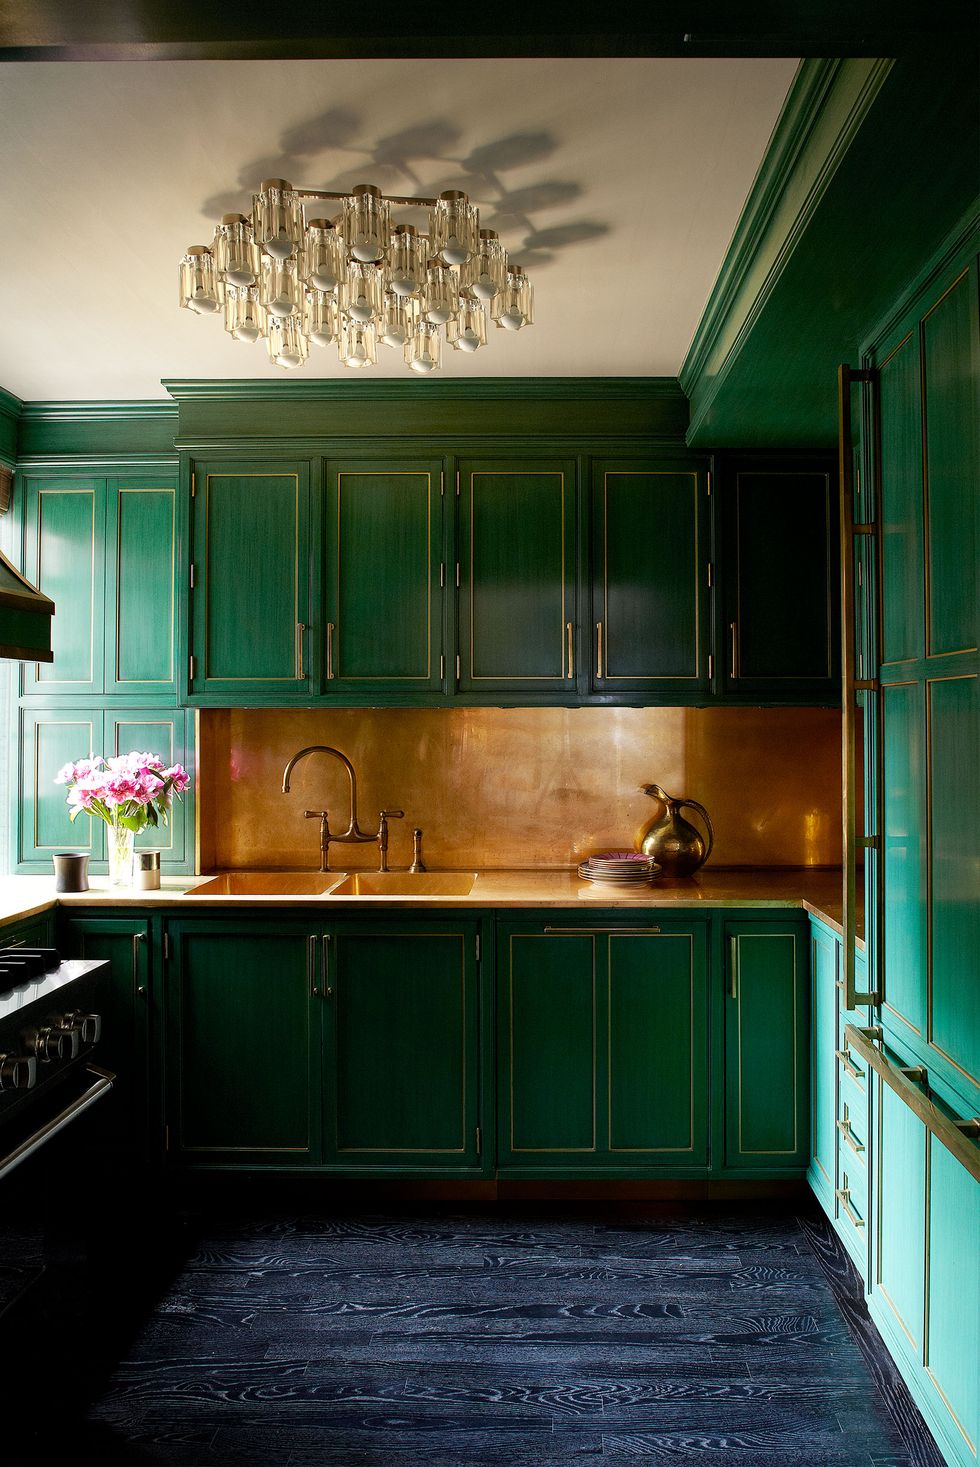 A very green galley kitchen with brass fixtures, blue wood floor, and gold tile backsplash